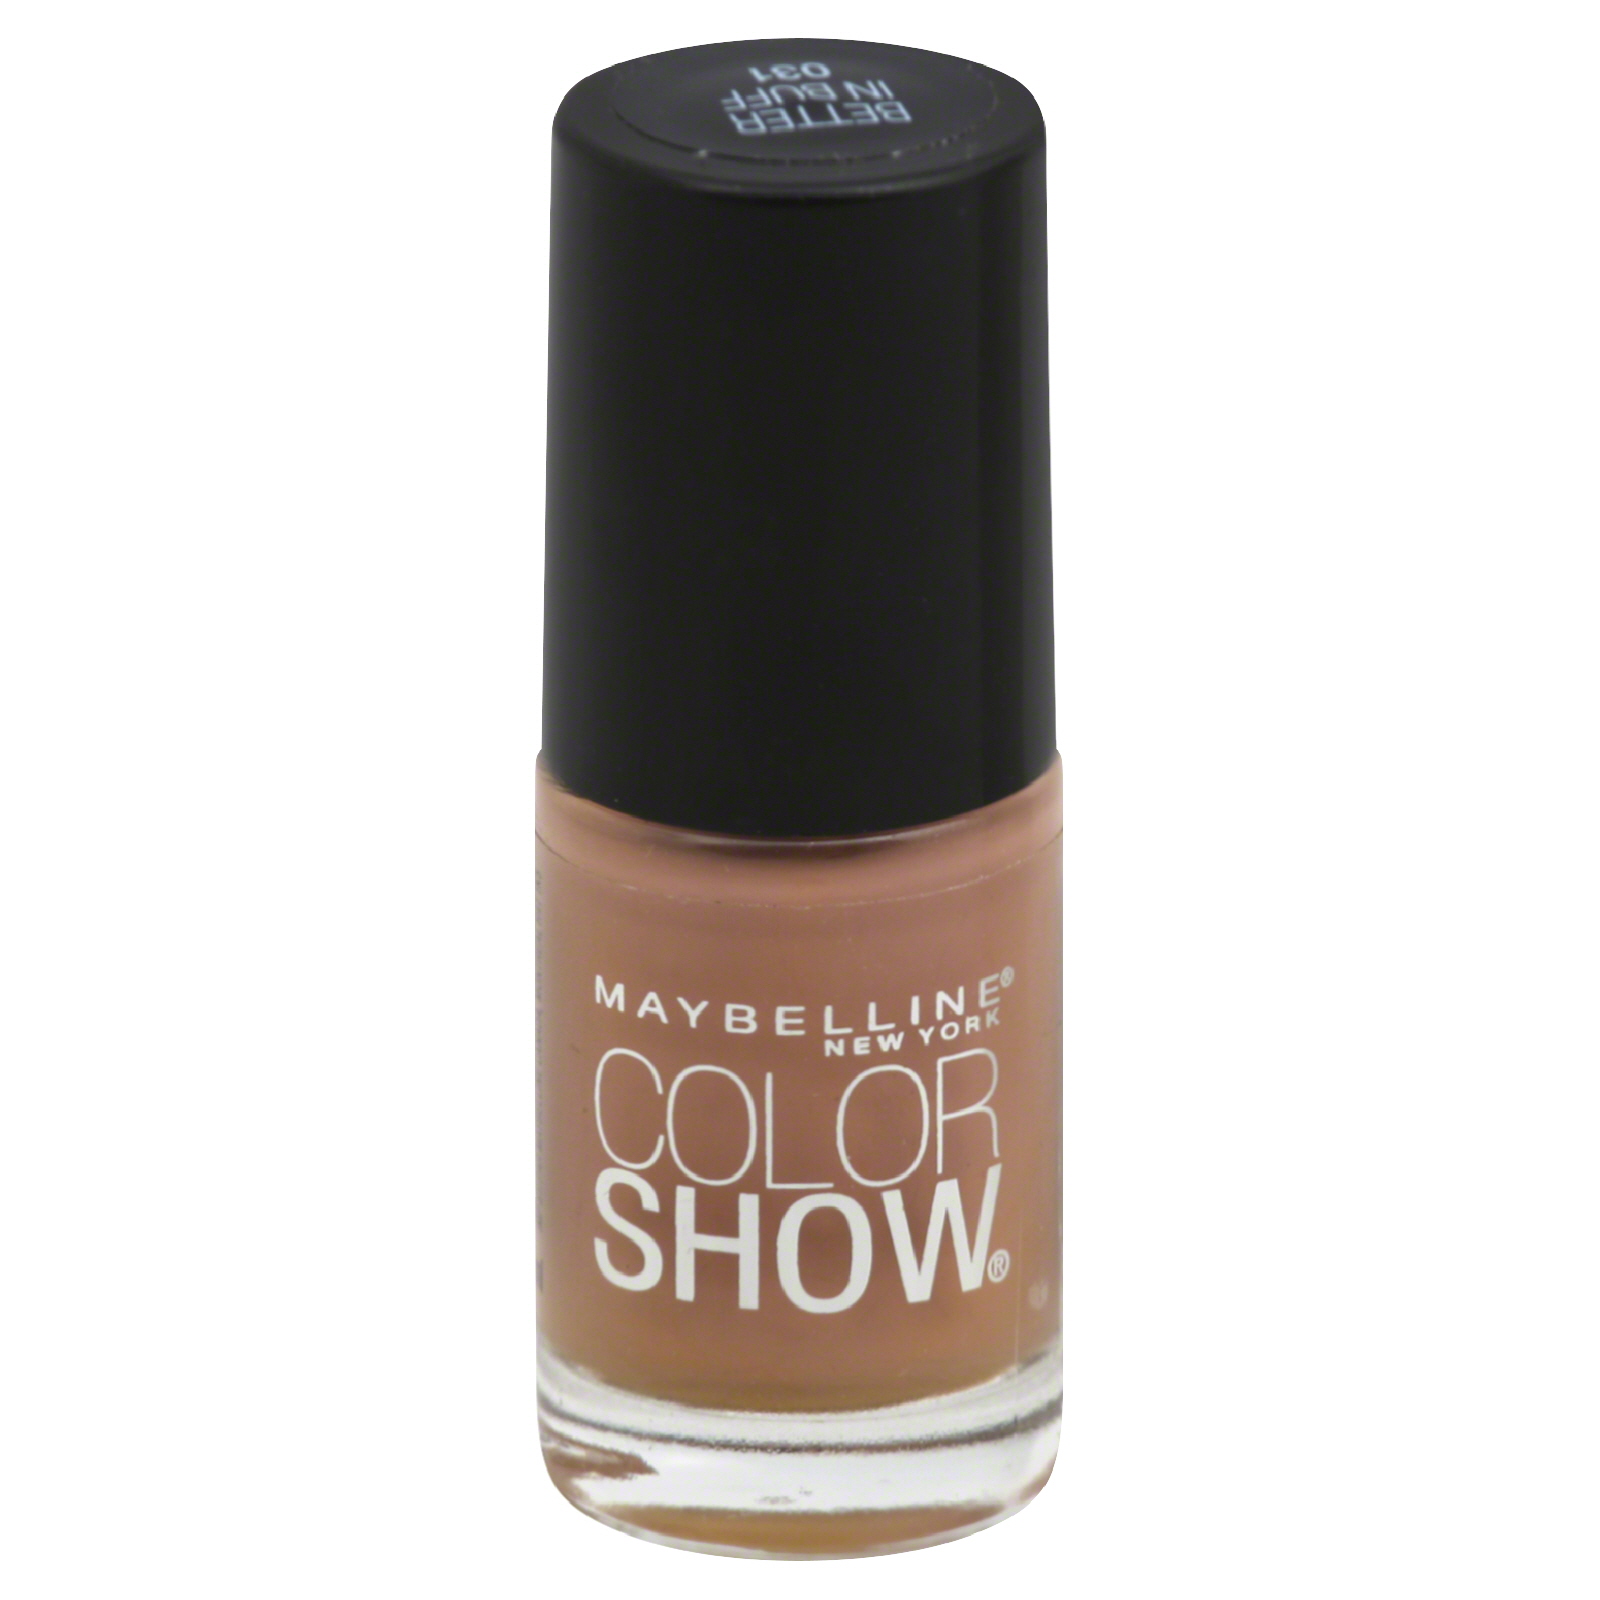 Maybelline New York Nail Lacquer, Better In Buff, 23 fl oz